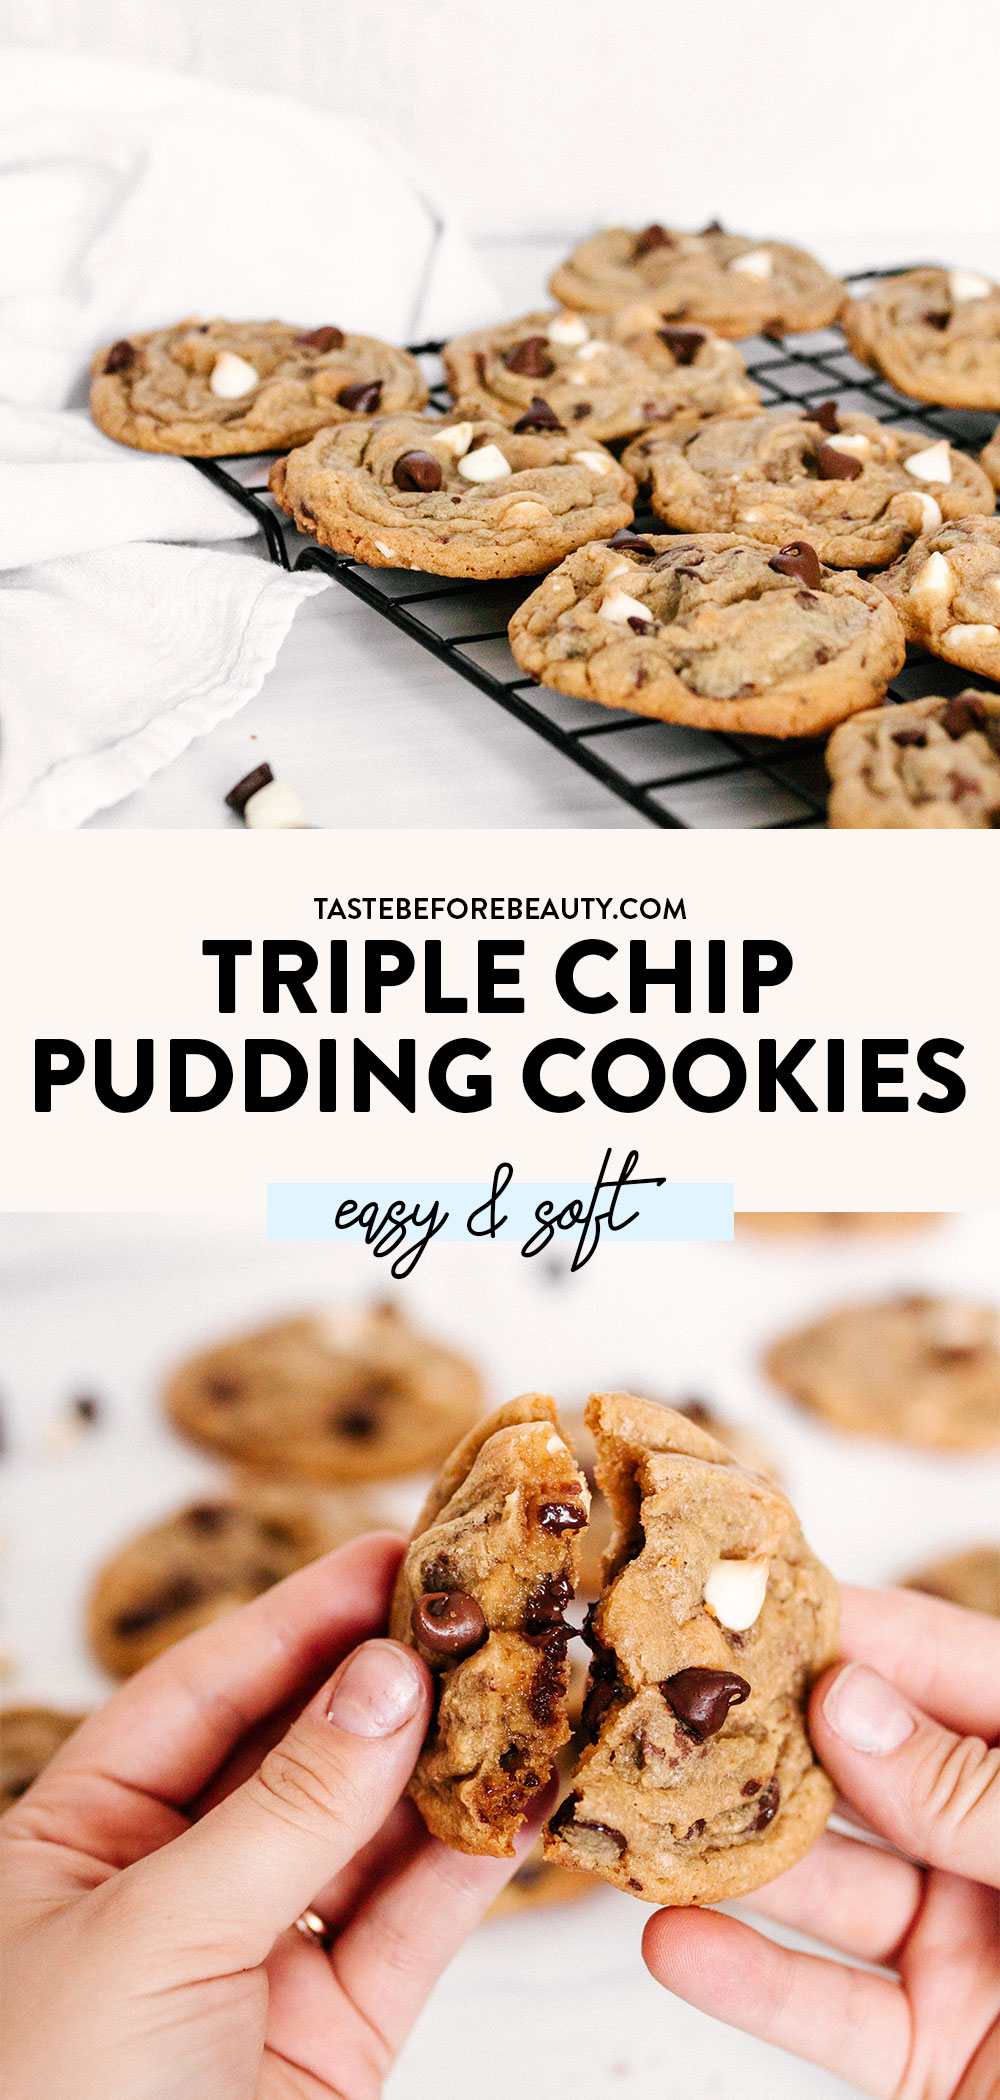 triple chip pudding cookies pinterest pin